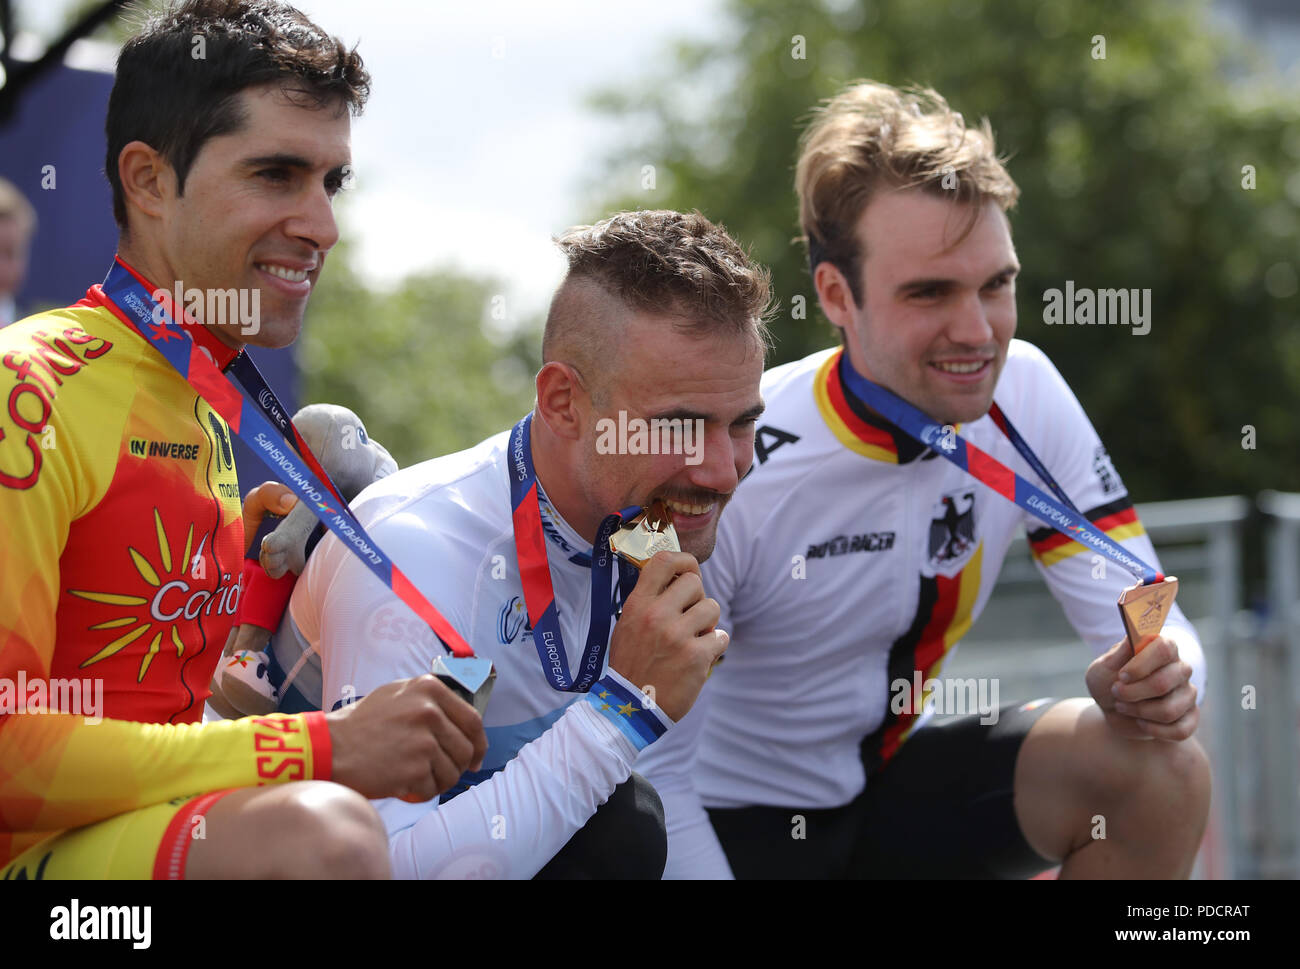 Gold medallist Belgium's Victor Campenaerts (centre), Silver medallist Spain's Jonathan Castroviejo (left) and bronze medallist Germany's Maximilian Schachmann in the Men's Time Trial on the podium during day seven of the 2018 European Championships at the Glasgow Cycling Road Race Course. Stock Photo